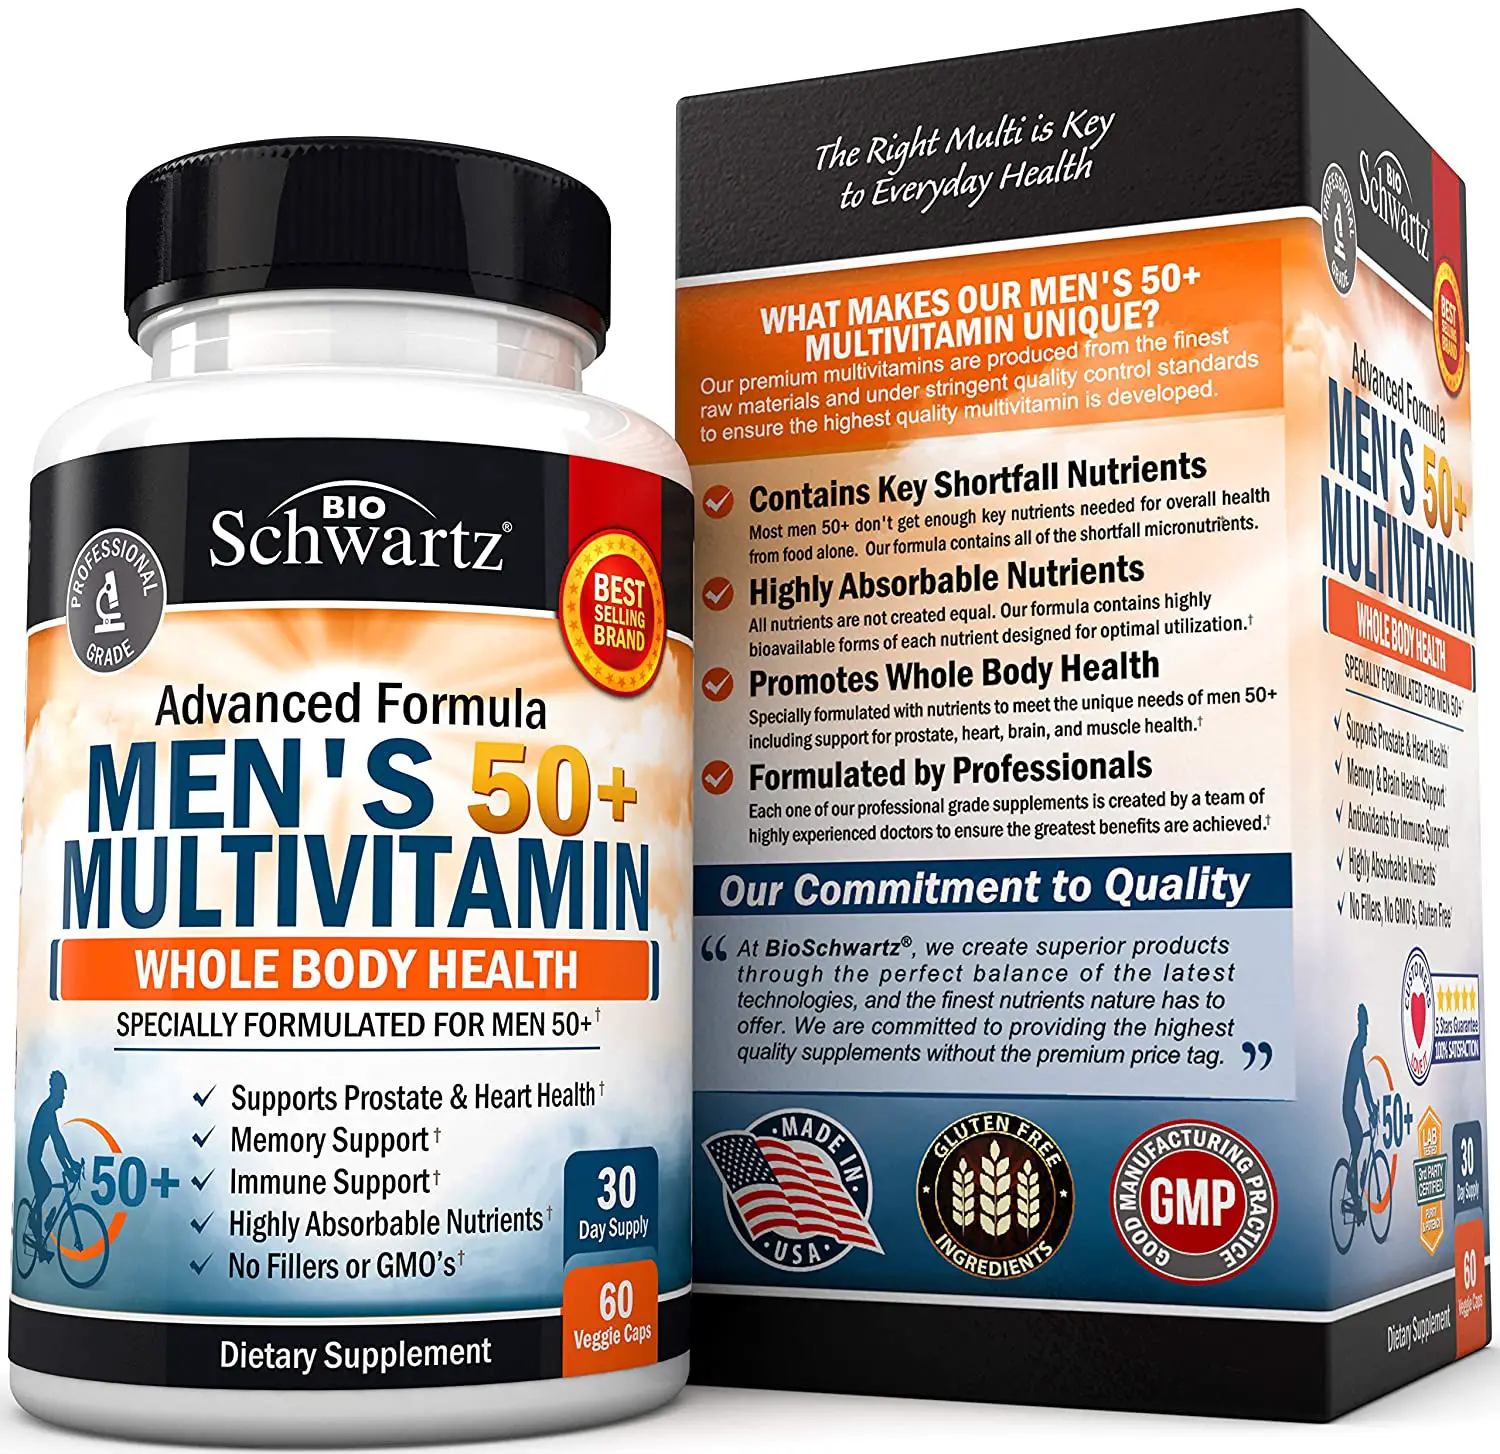 Once Daily Multivitamin for Men 50 and Over